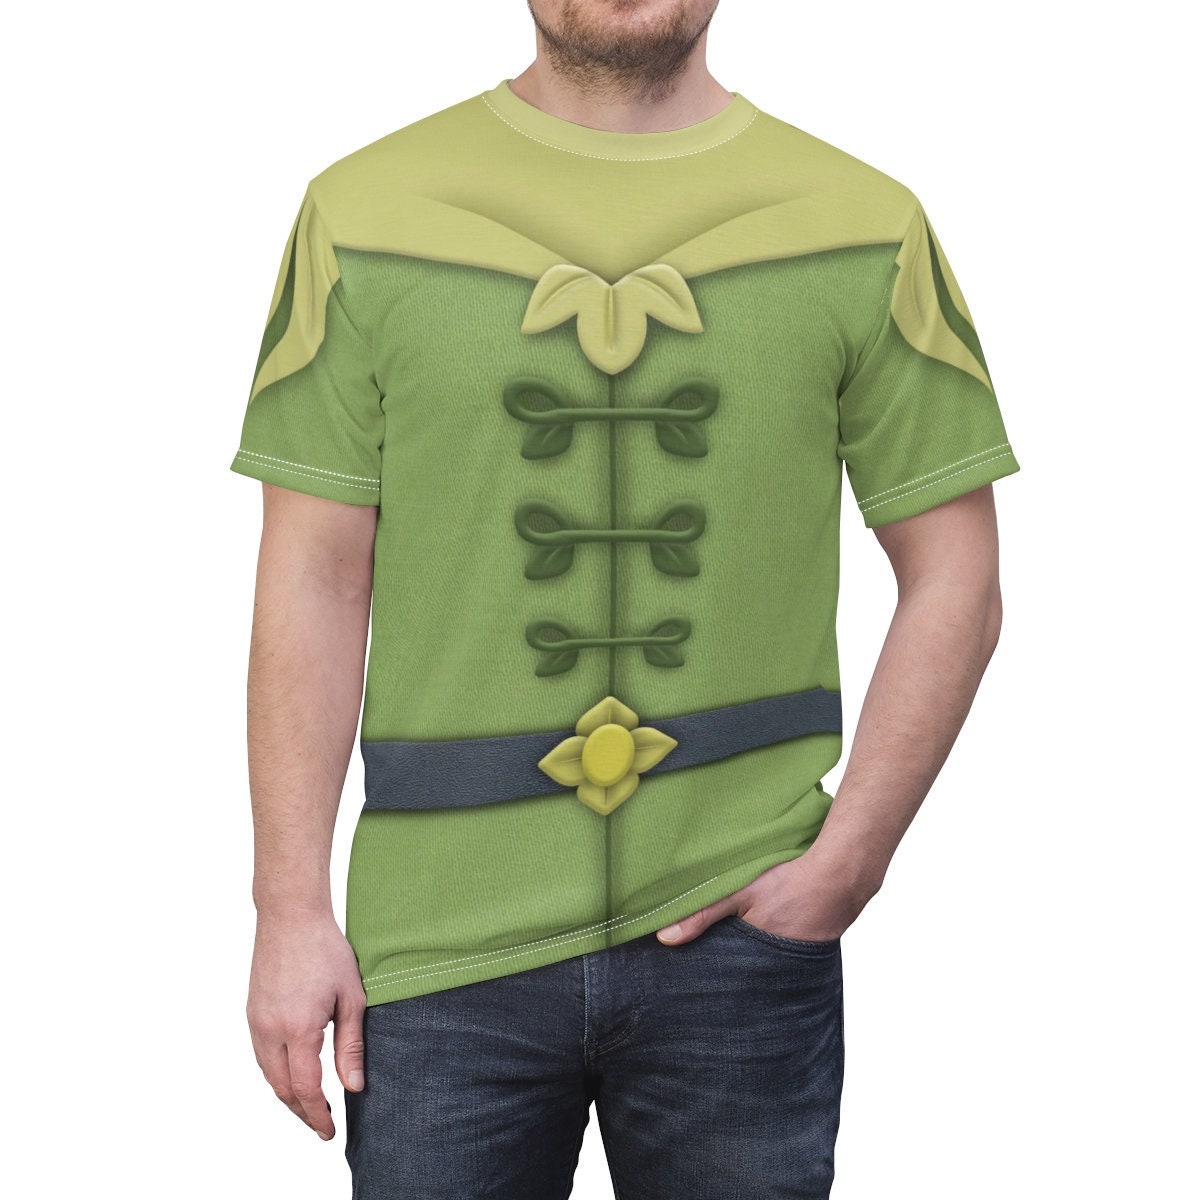 Prince Naveen Unisex Shirt Princess And The Frog Costume Disney Inspired